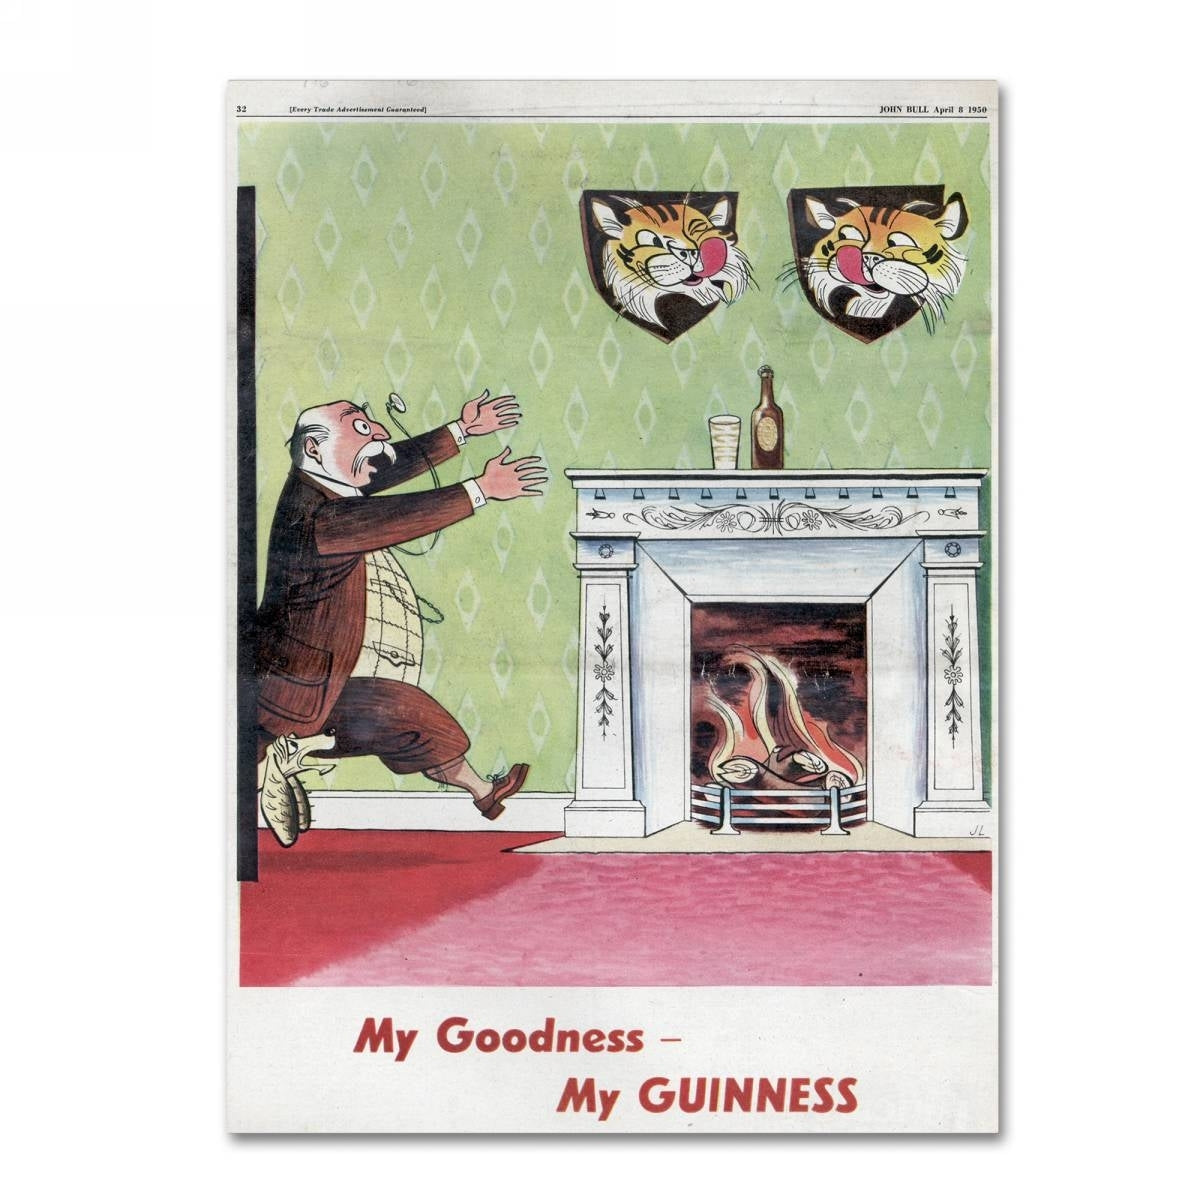 My Guinness, my Guinness Brewery 'My Goodness My Guinness V' gallery-wrapped art piece.